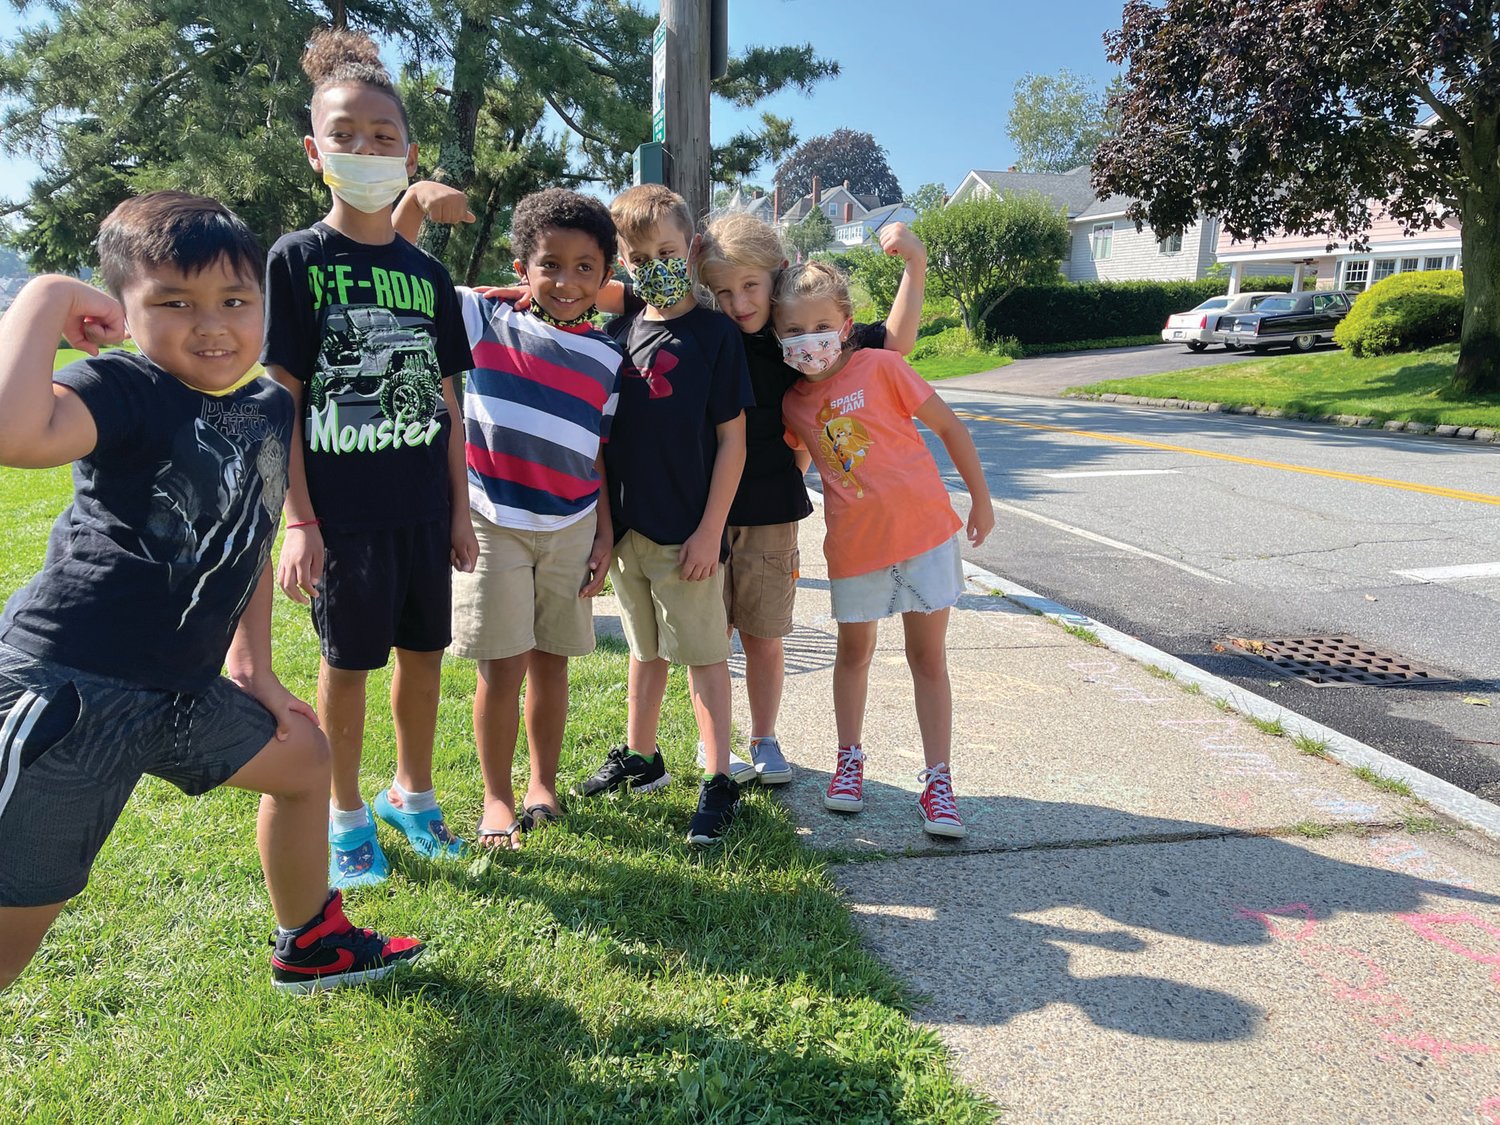 TEAM EFFORT: The youngest students in the STEM Advantage summer program gathered at Stillhouse Cove last week to celebrate the culmination of their six weeks of work, which included weekly gatherings at the cove. Some of the students tagged storm drains with chalk to help education passers-by about the dangers of pollution. Pictured, from left, are Ayden Barron, Kendriech Xayapanya. Matthew Holman, and Temperance, Minos and Emery Cleveland. (Herald photos by Daniel Kittredge) keychain